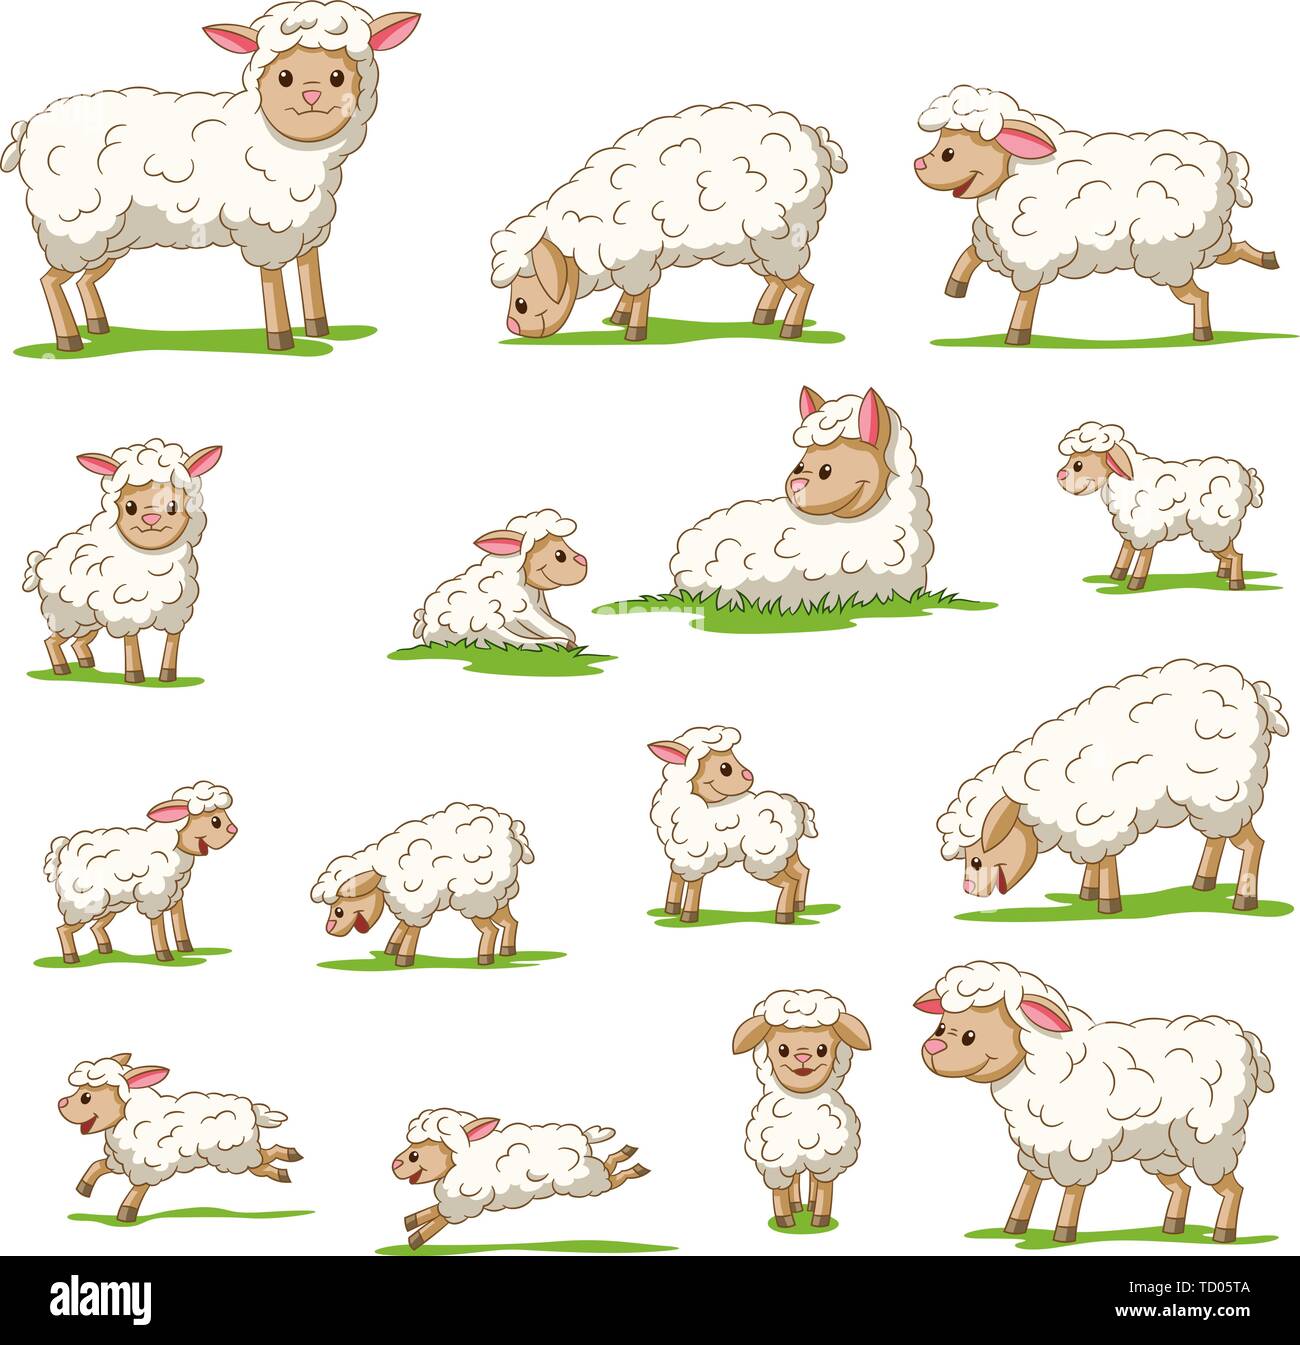 Collection of cute cartoon sheep and lambs. Isolated on white background. Stock Vector